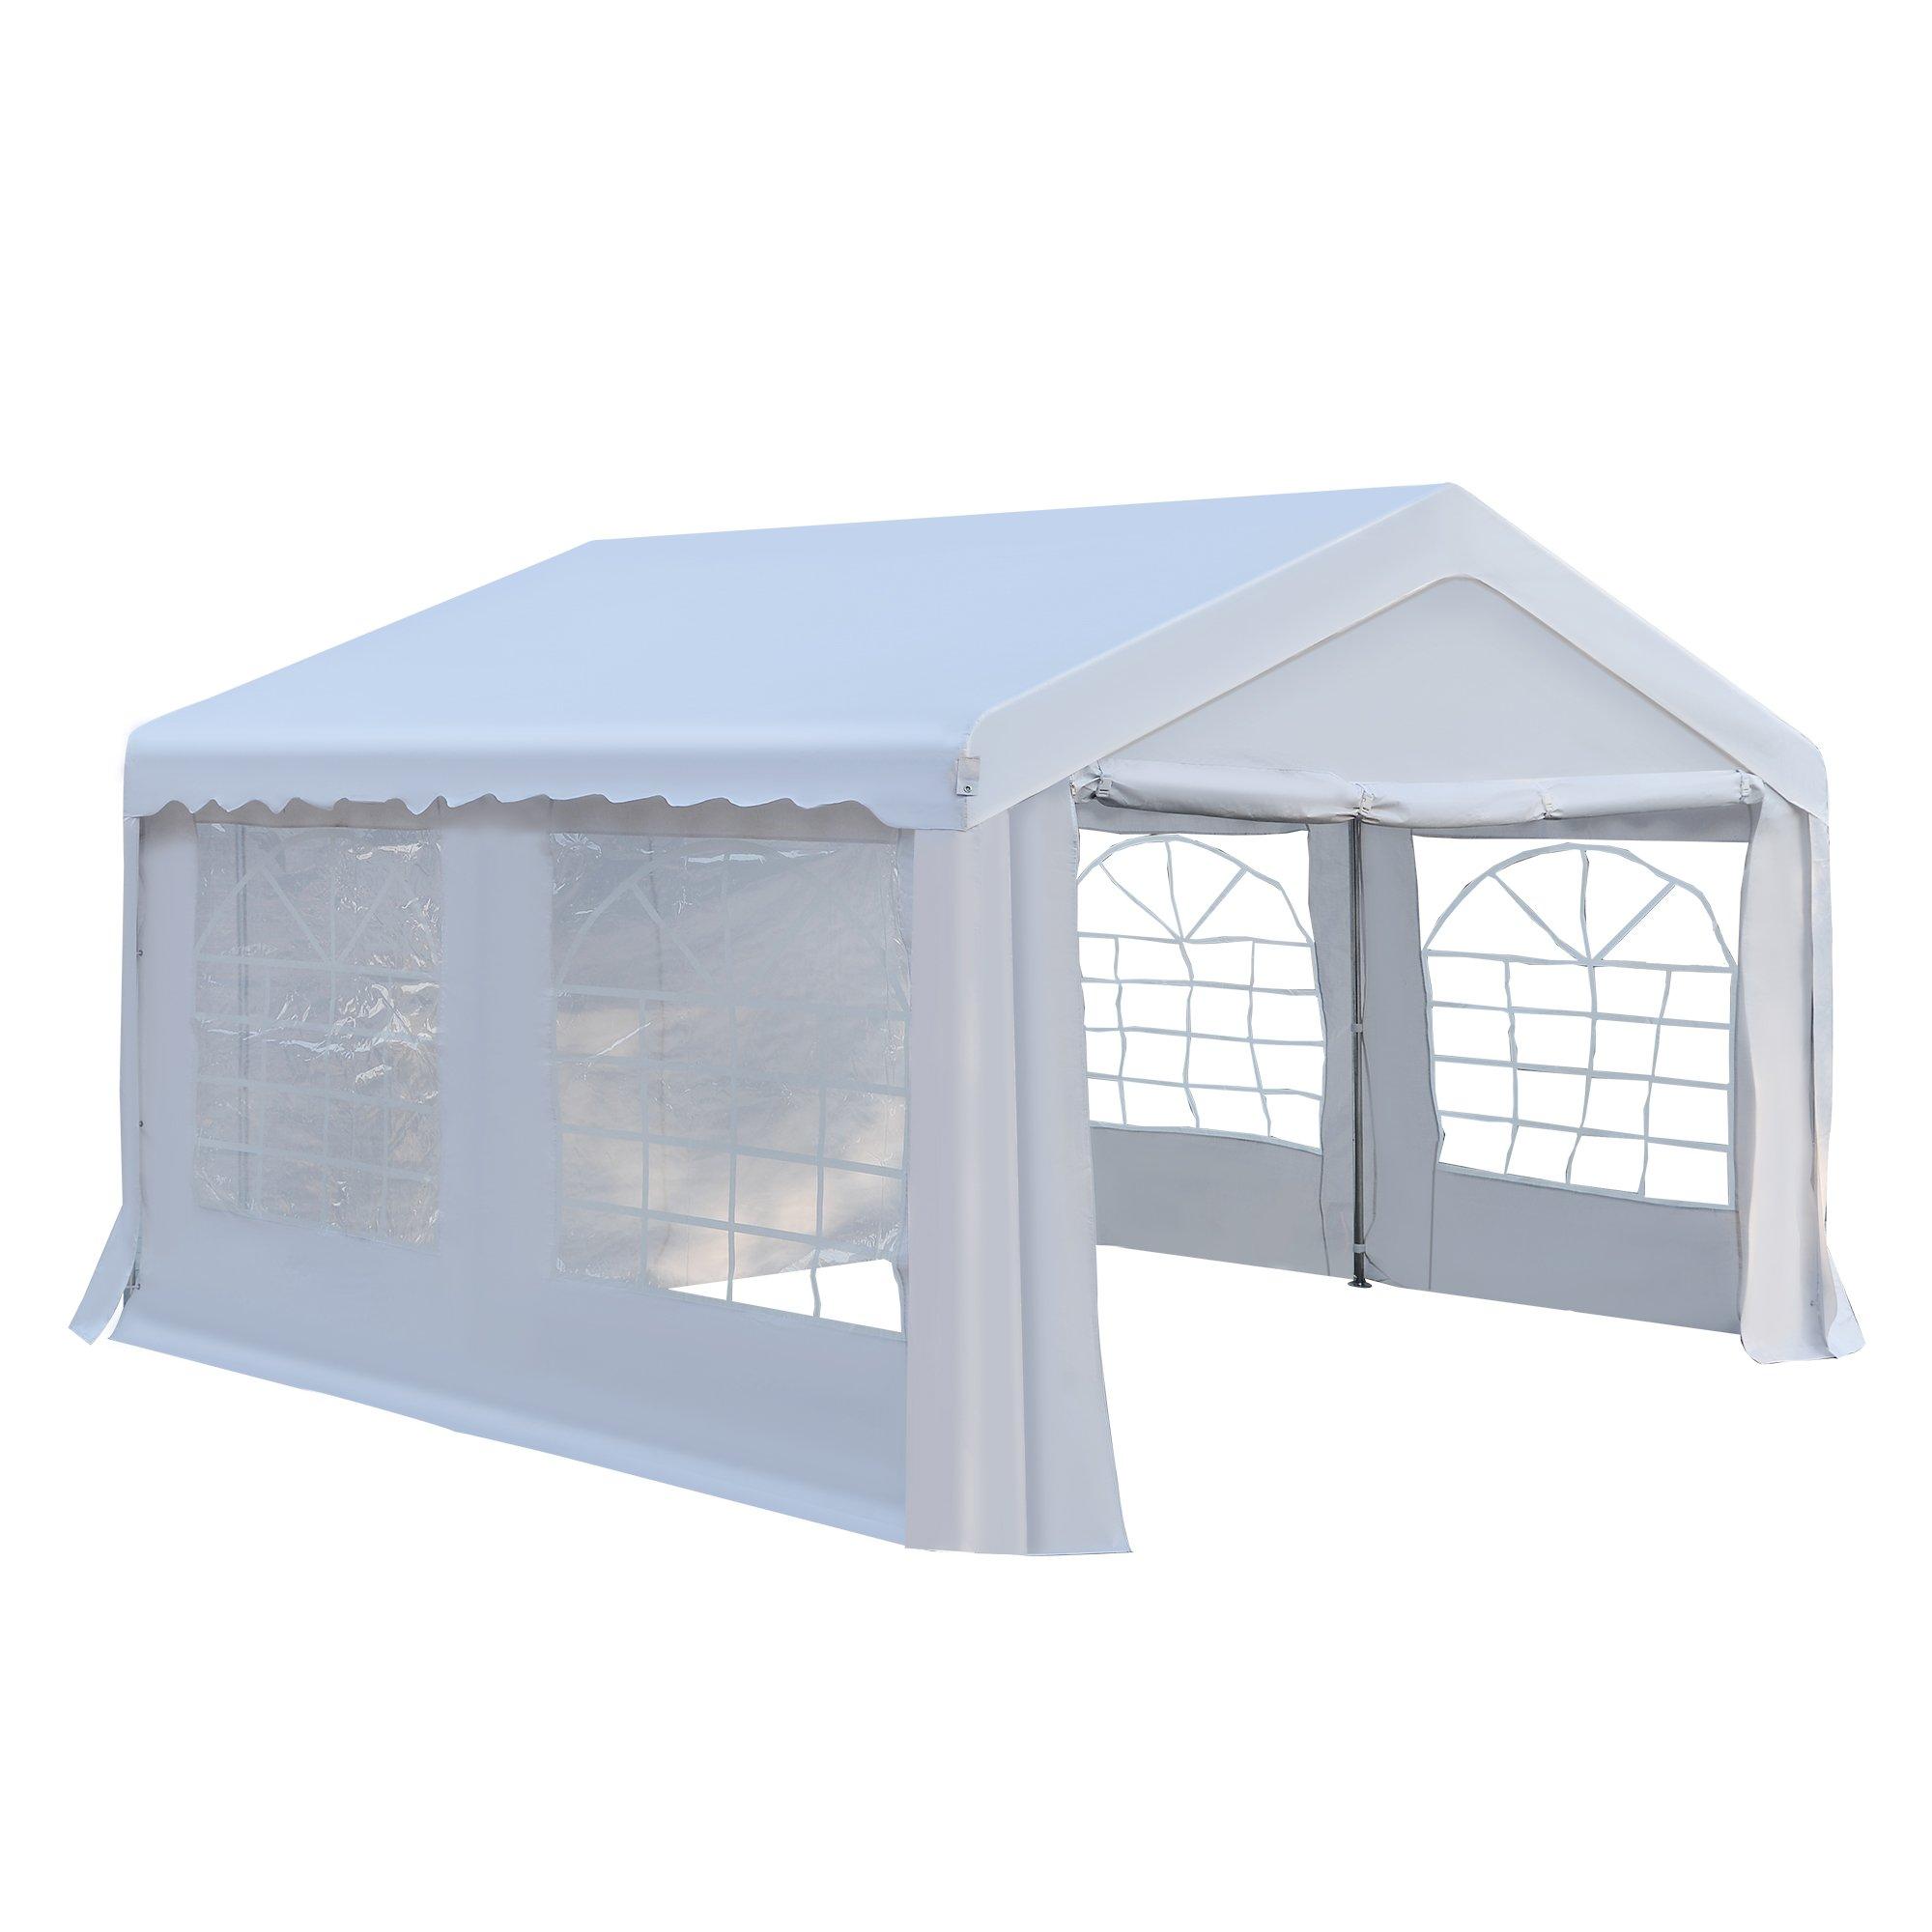 Outsunny Party Gazebo Outdoors Water proof White 4000 mm x 4000 mm